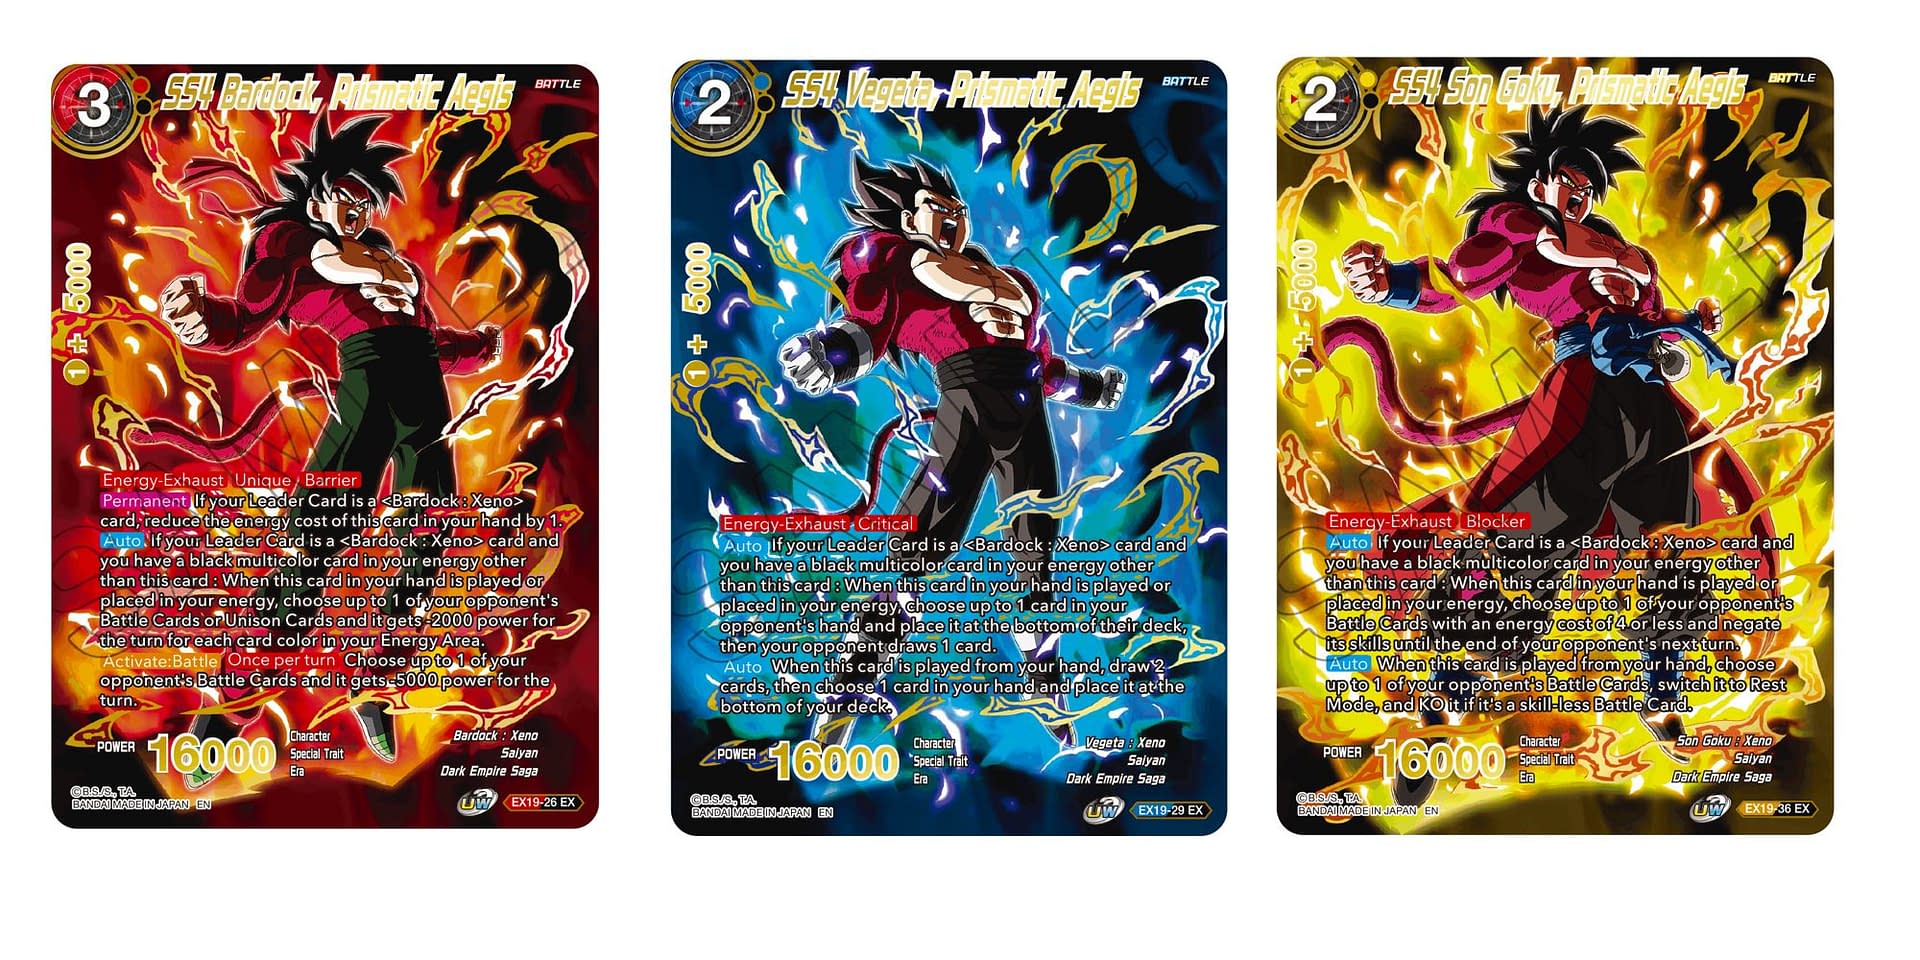 More Ss4 Cards From New Dragon Ball Super 21 Anniversary Set